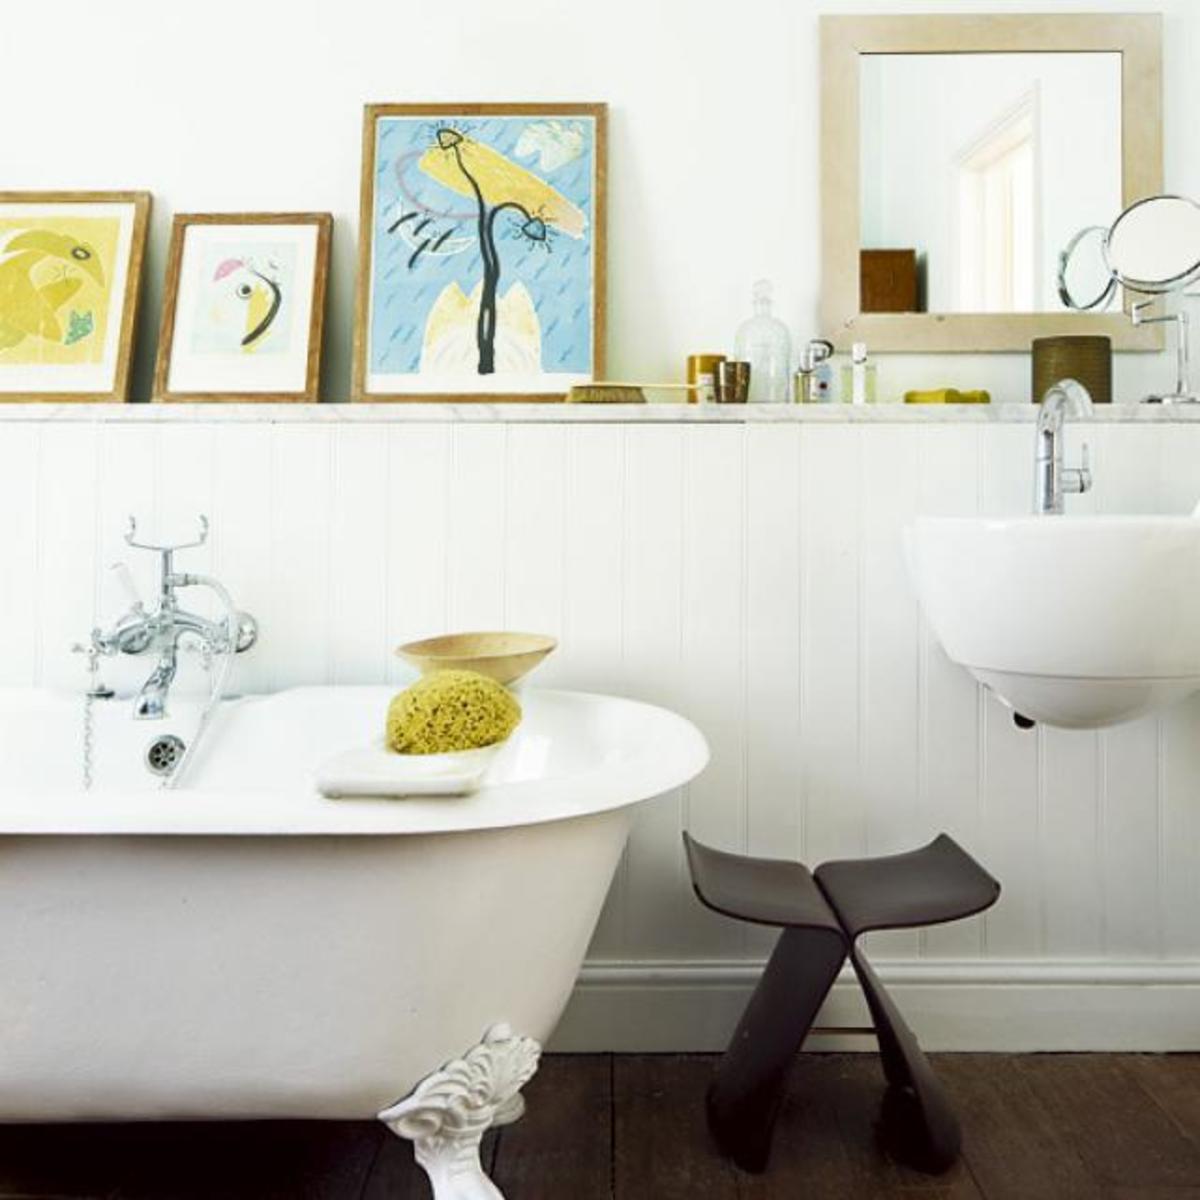 What makes a bathroom feel truly comfortable?